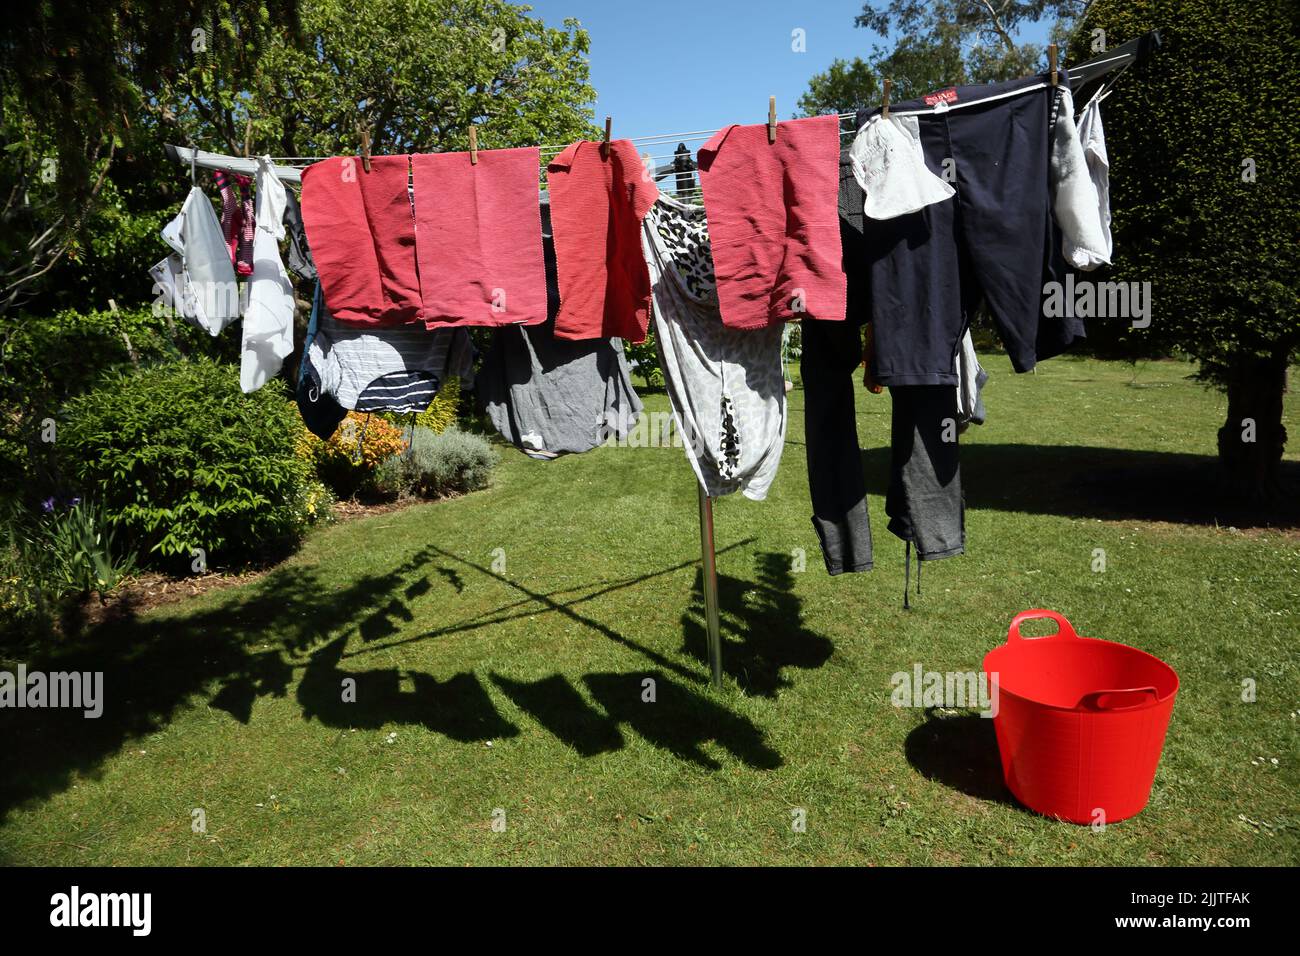 Clothes Drying on Rotary Line on a Sunny Day in May Surrey England Stock Photo